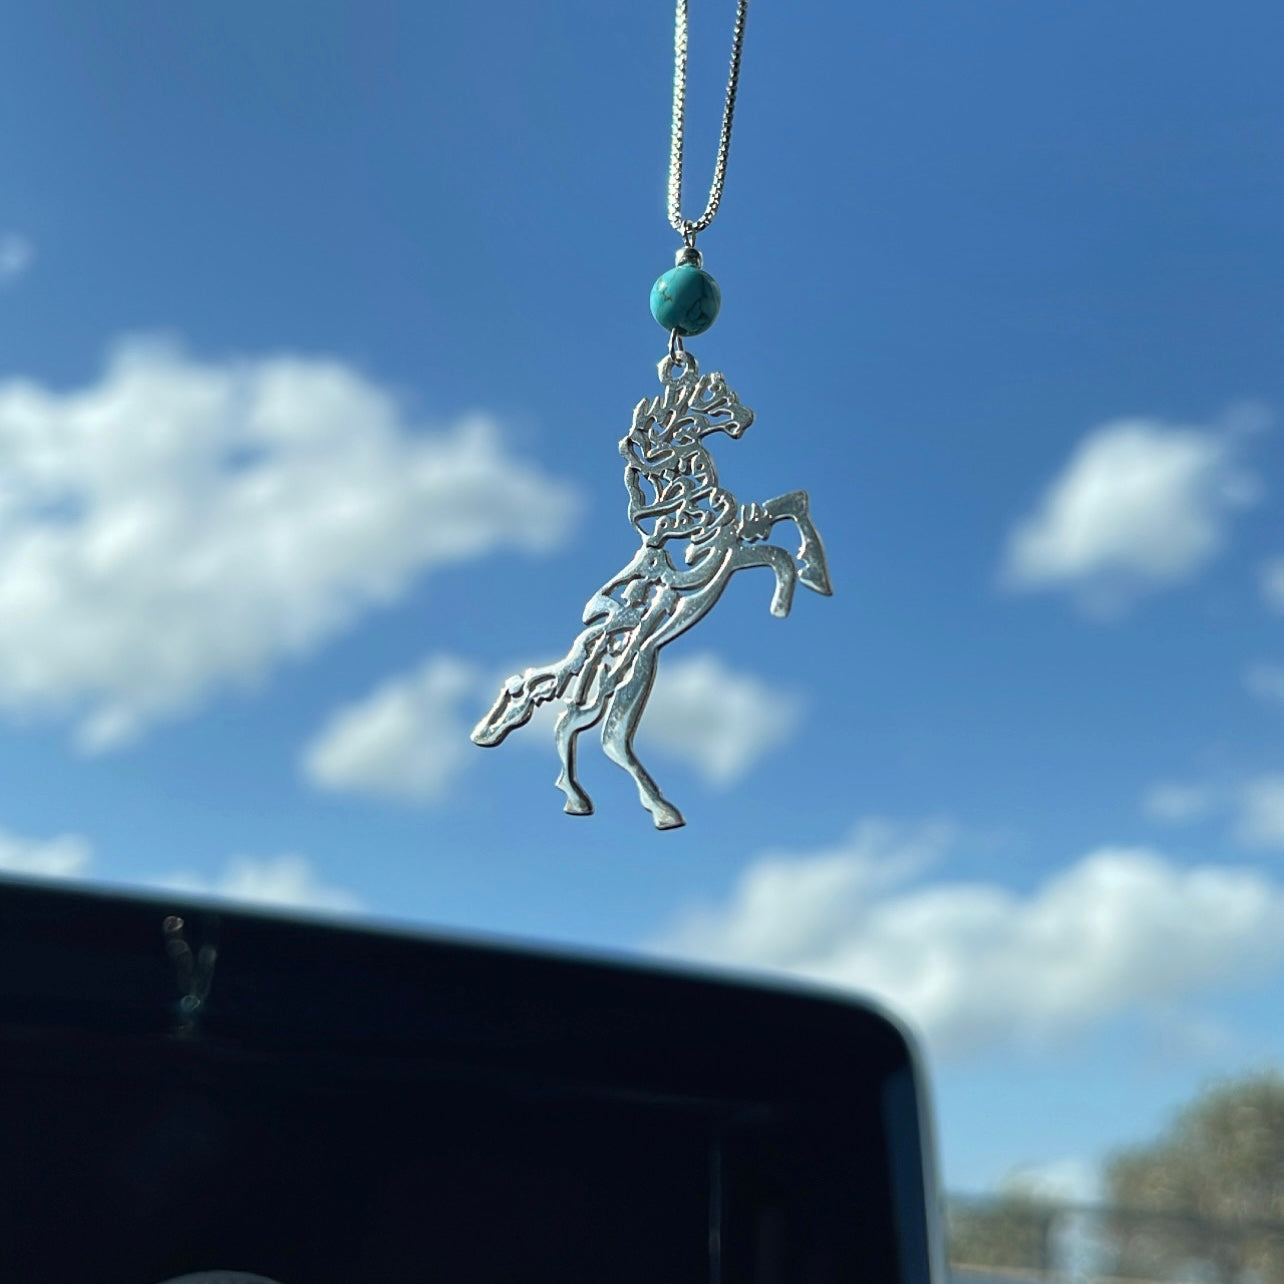 Horse car mirror / Necklace with a verse from سورة يوسف with turquoi